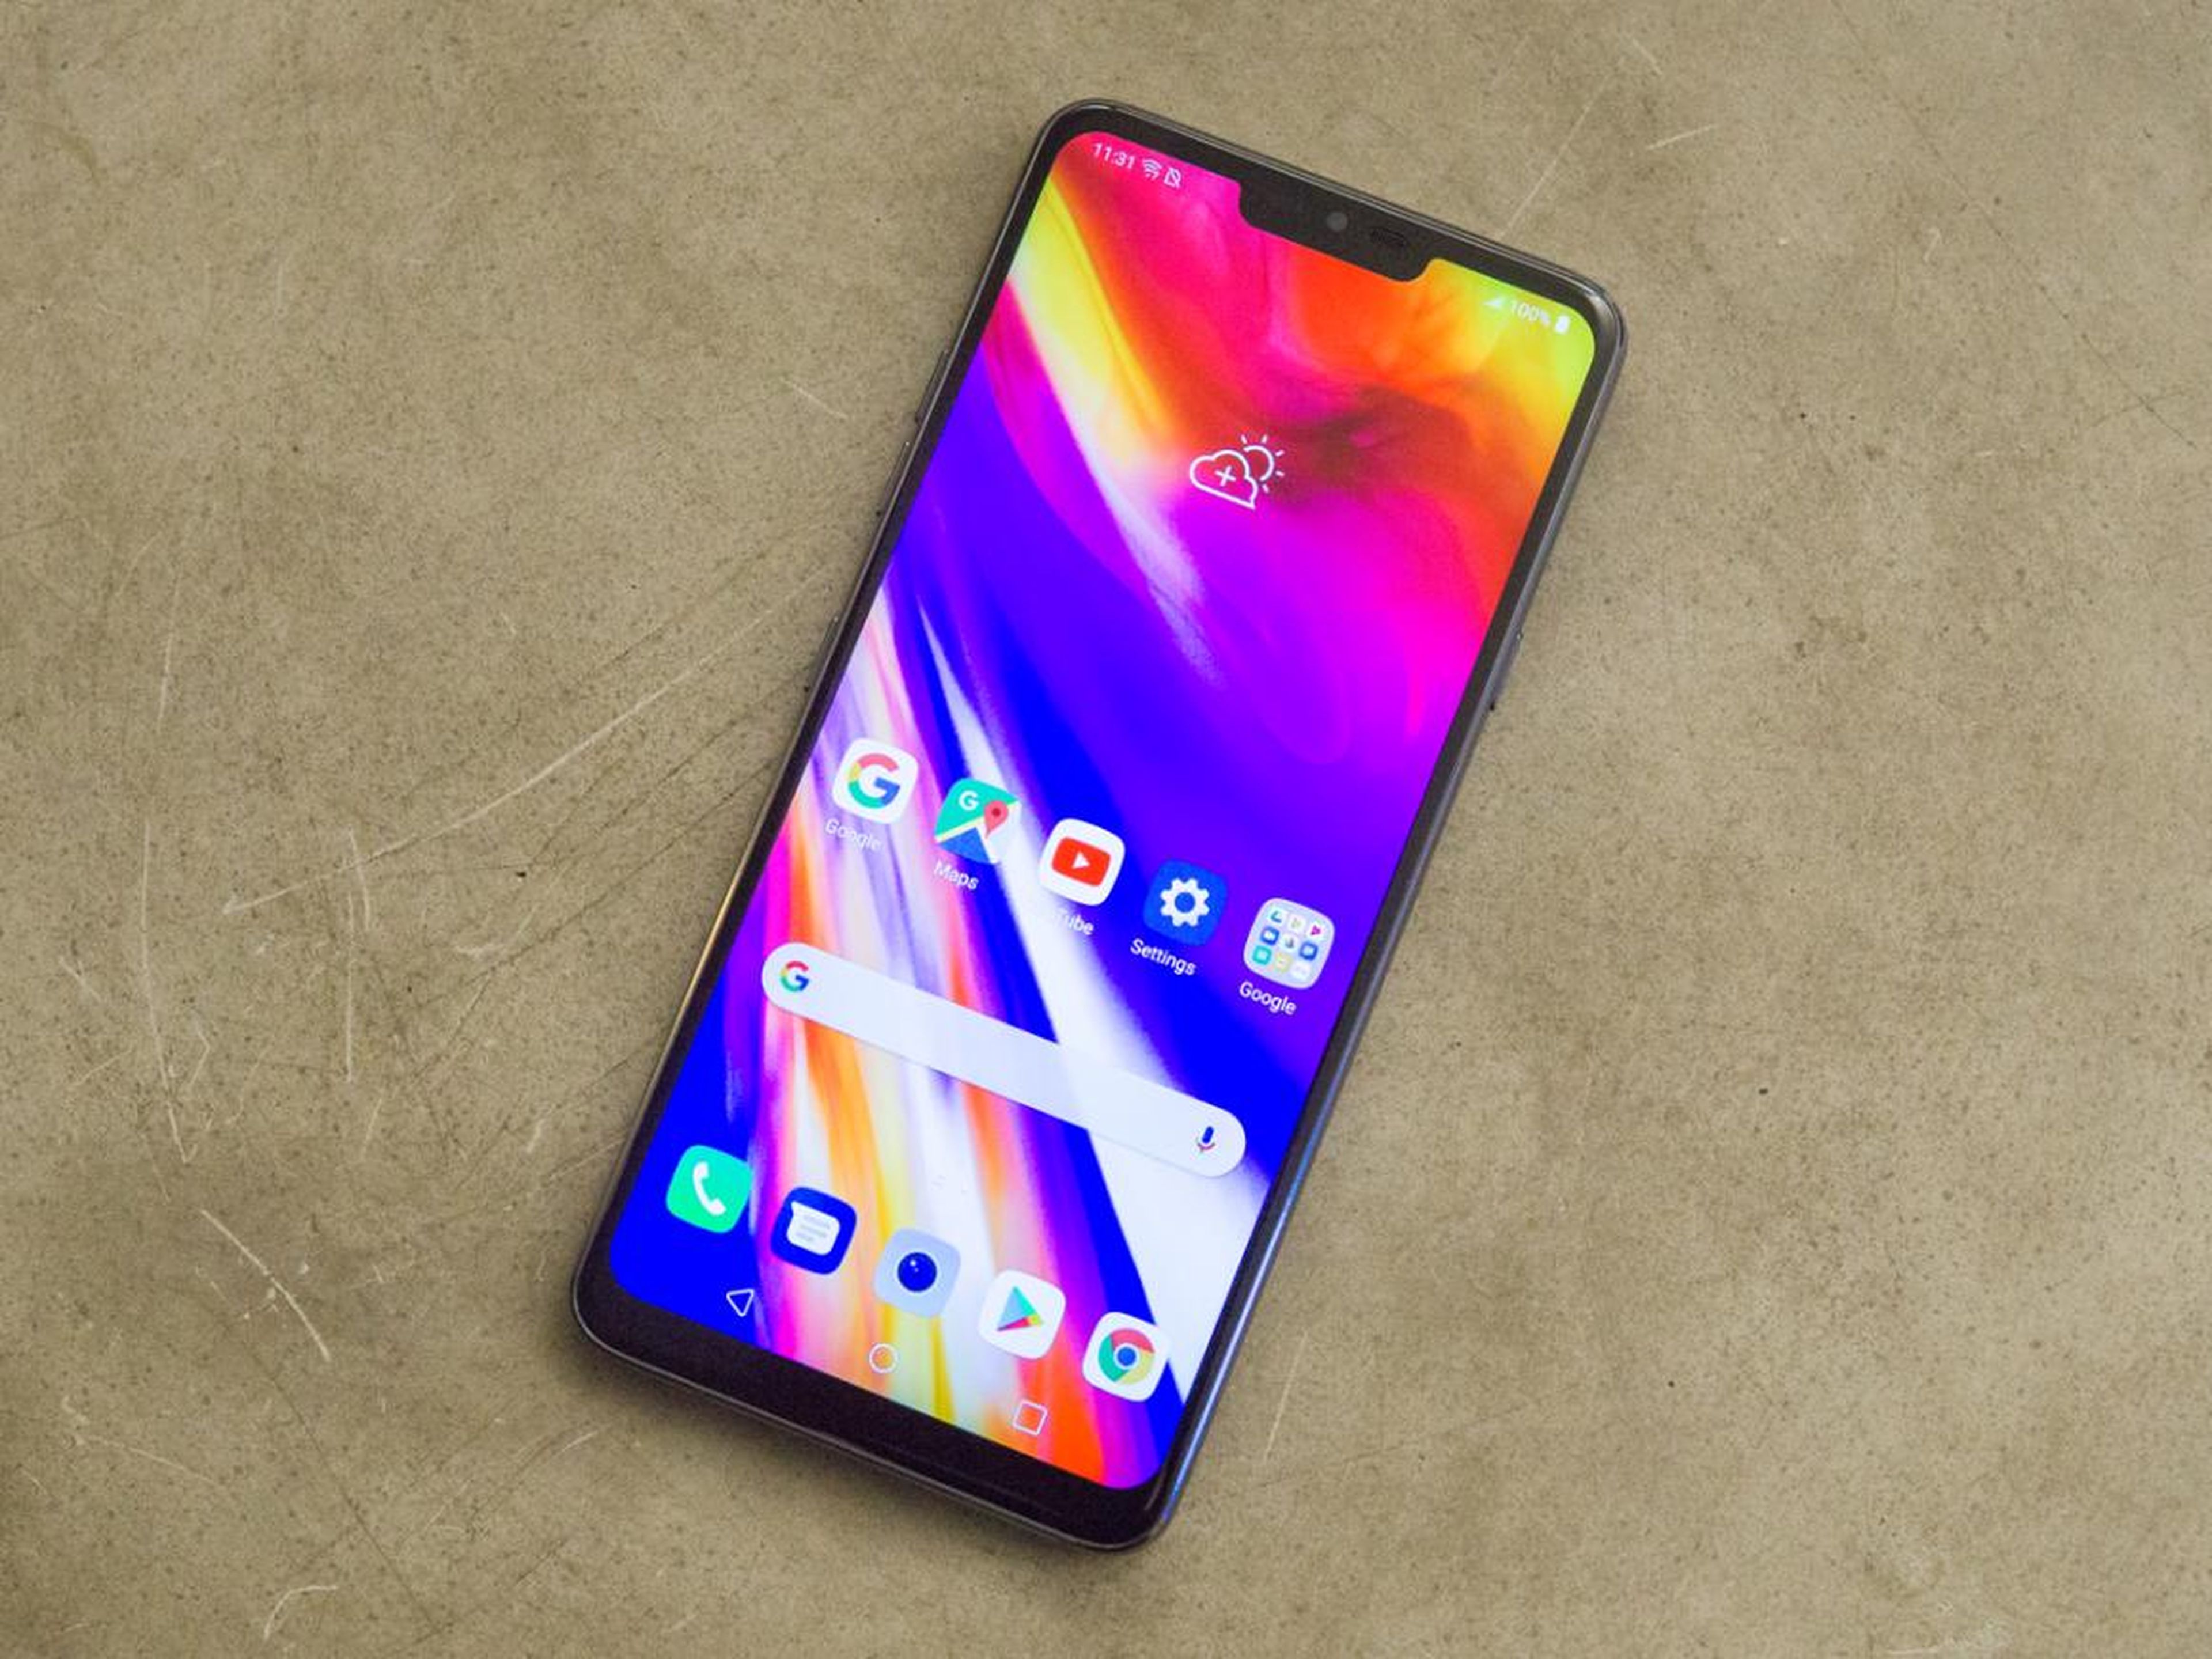 Here it is, folks: The LG G7.